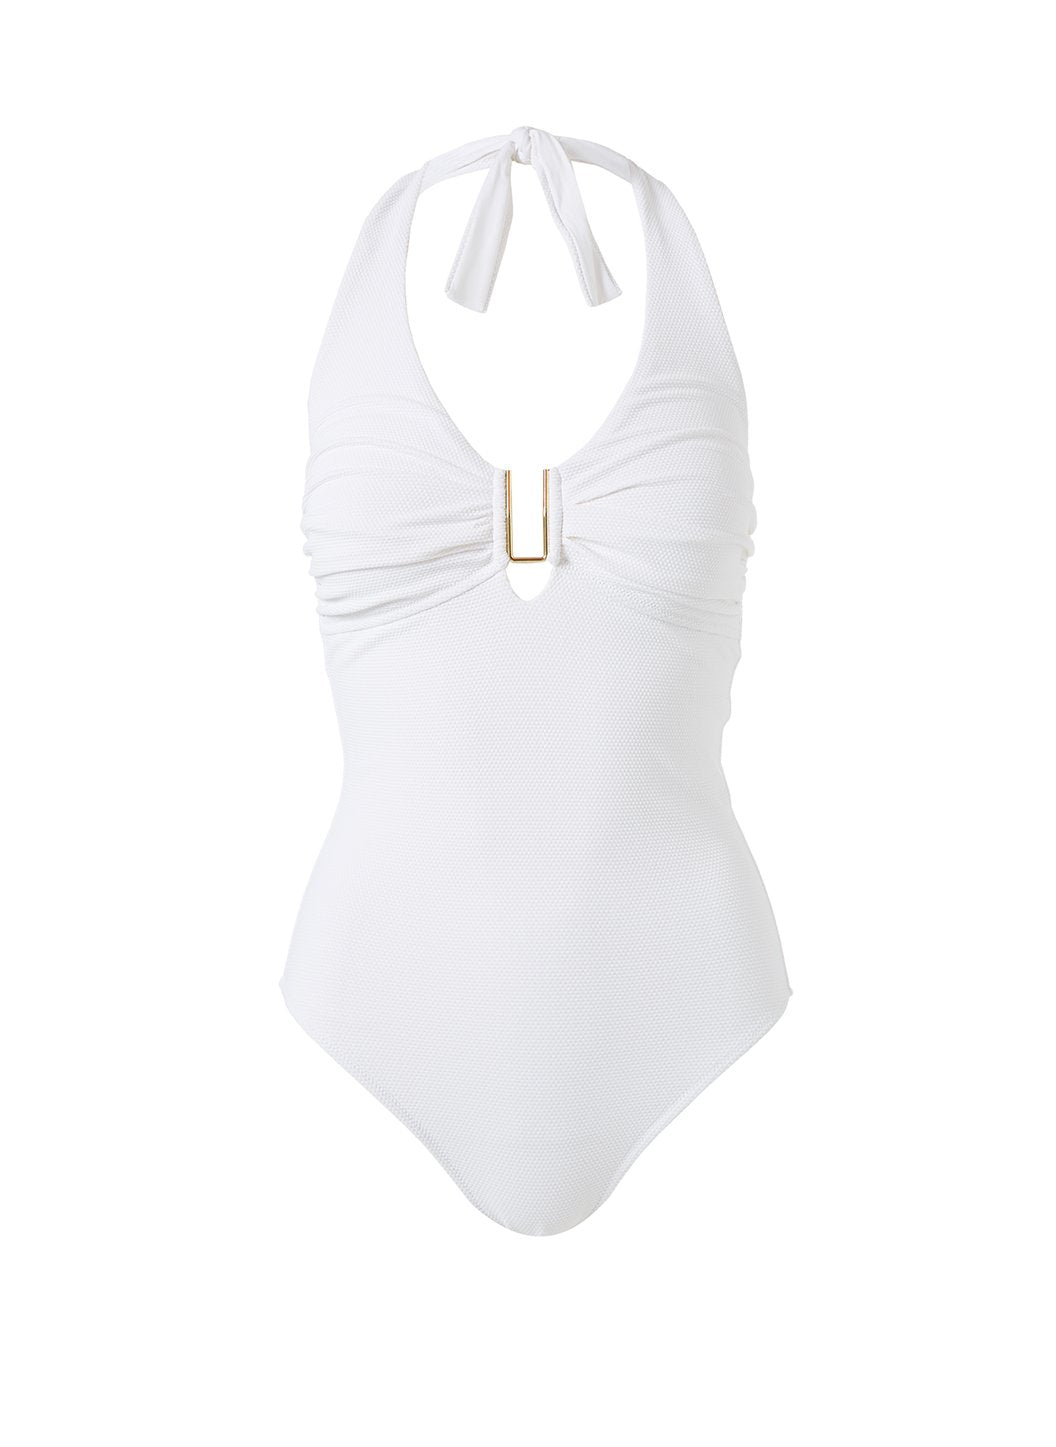 Tampa White Pique Swimsuit Cutout 